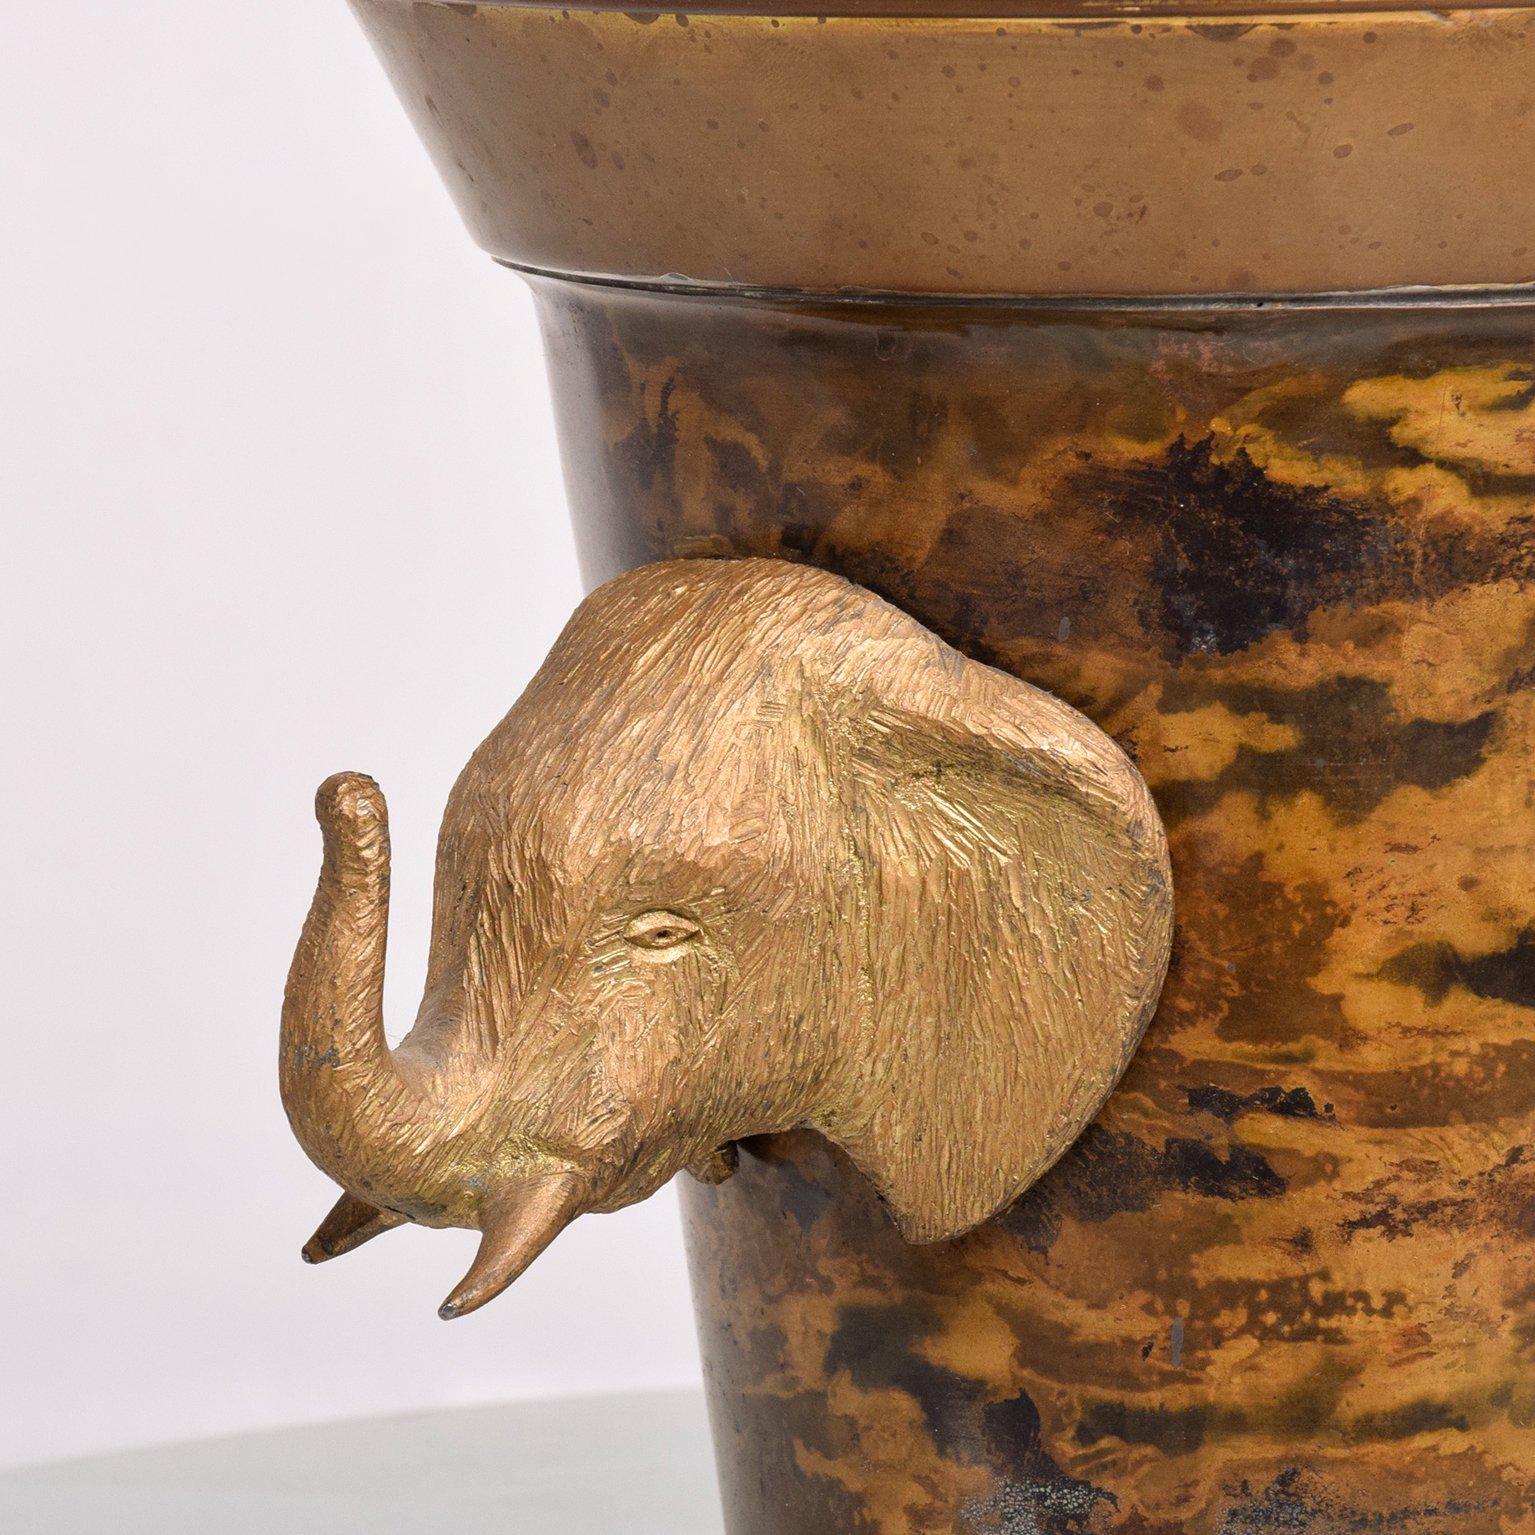 For your consideration a vintage ice bucket made of brass. Beautiful and unique. The bucket is made of brass and has a patinated églomisé finish on the brass. The handles are elephants made of solid brass. Matching lid.

Unmarked, no information